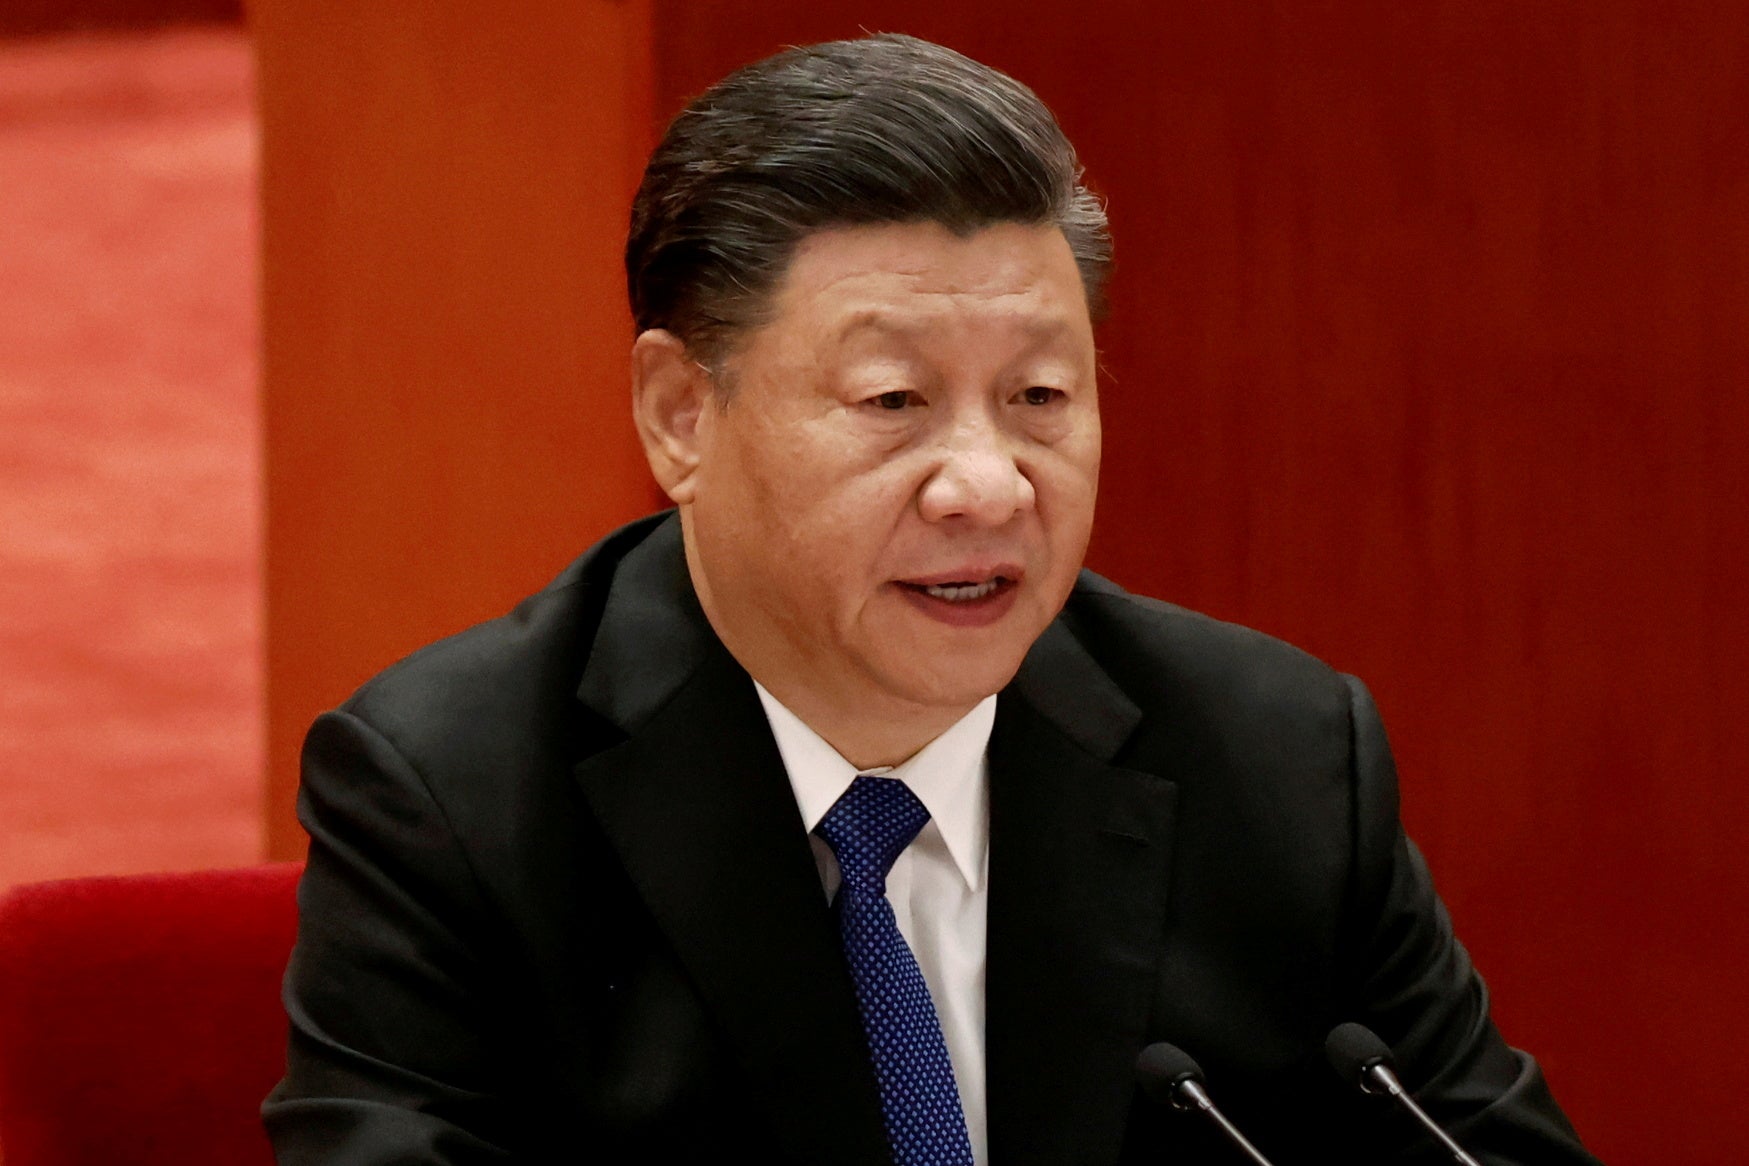 Power hungry: Xi Jinping is likely to focus on China’s energy needs over global climate goals